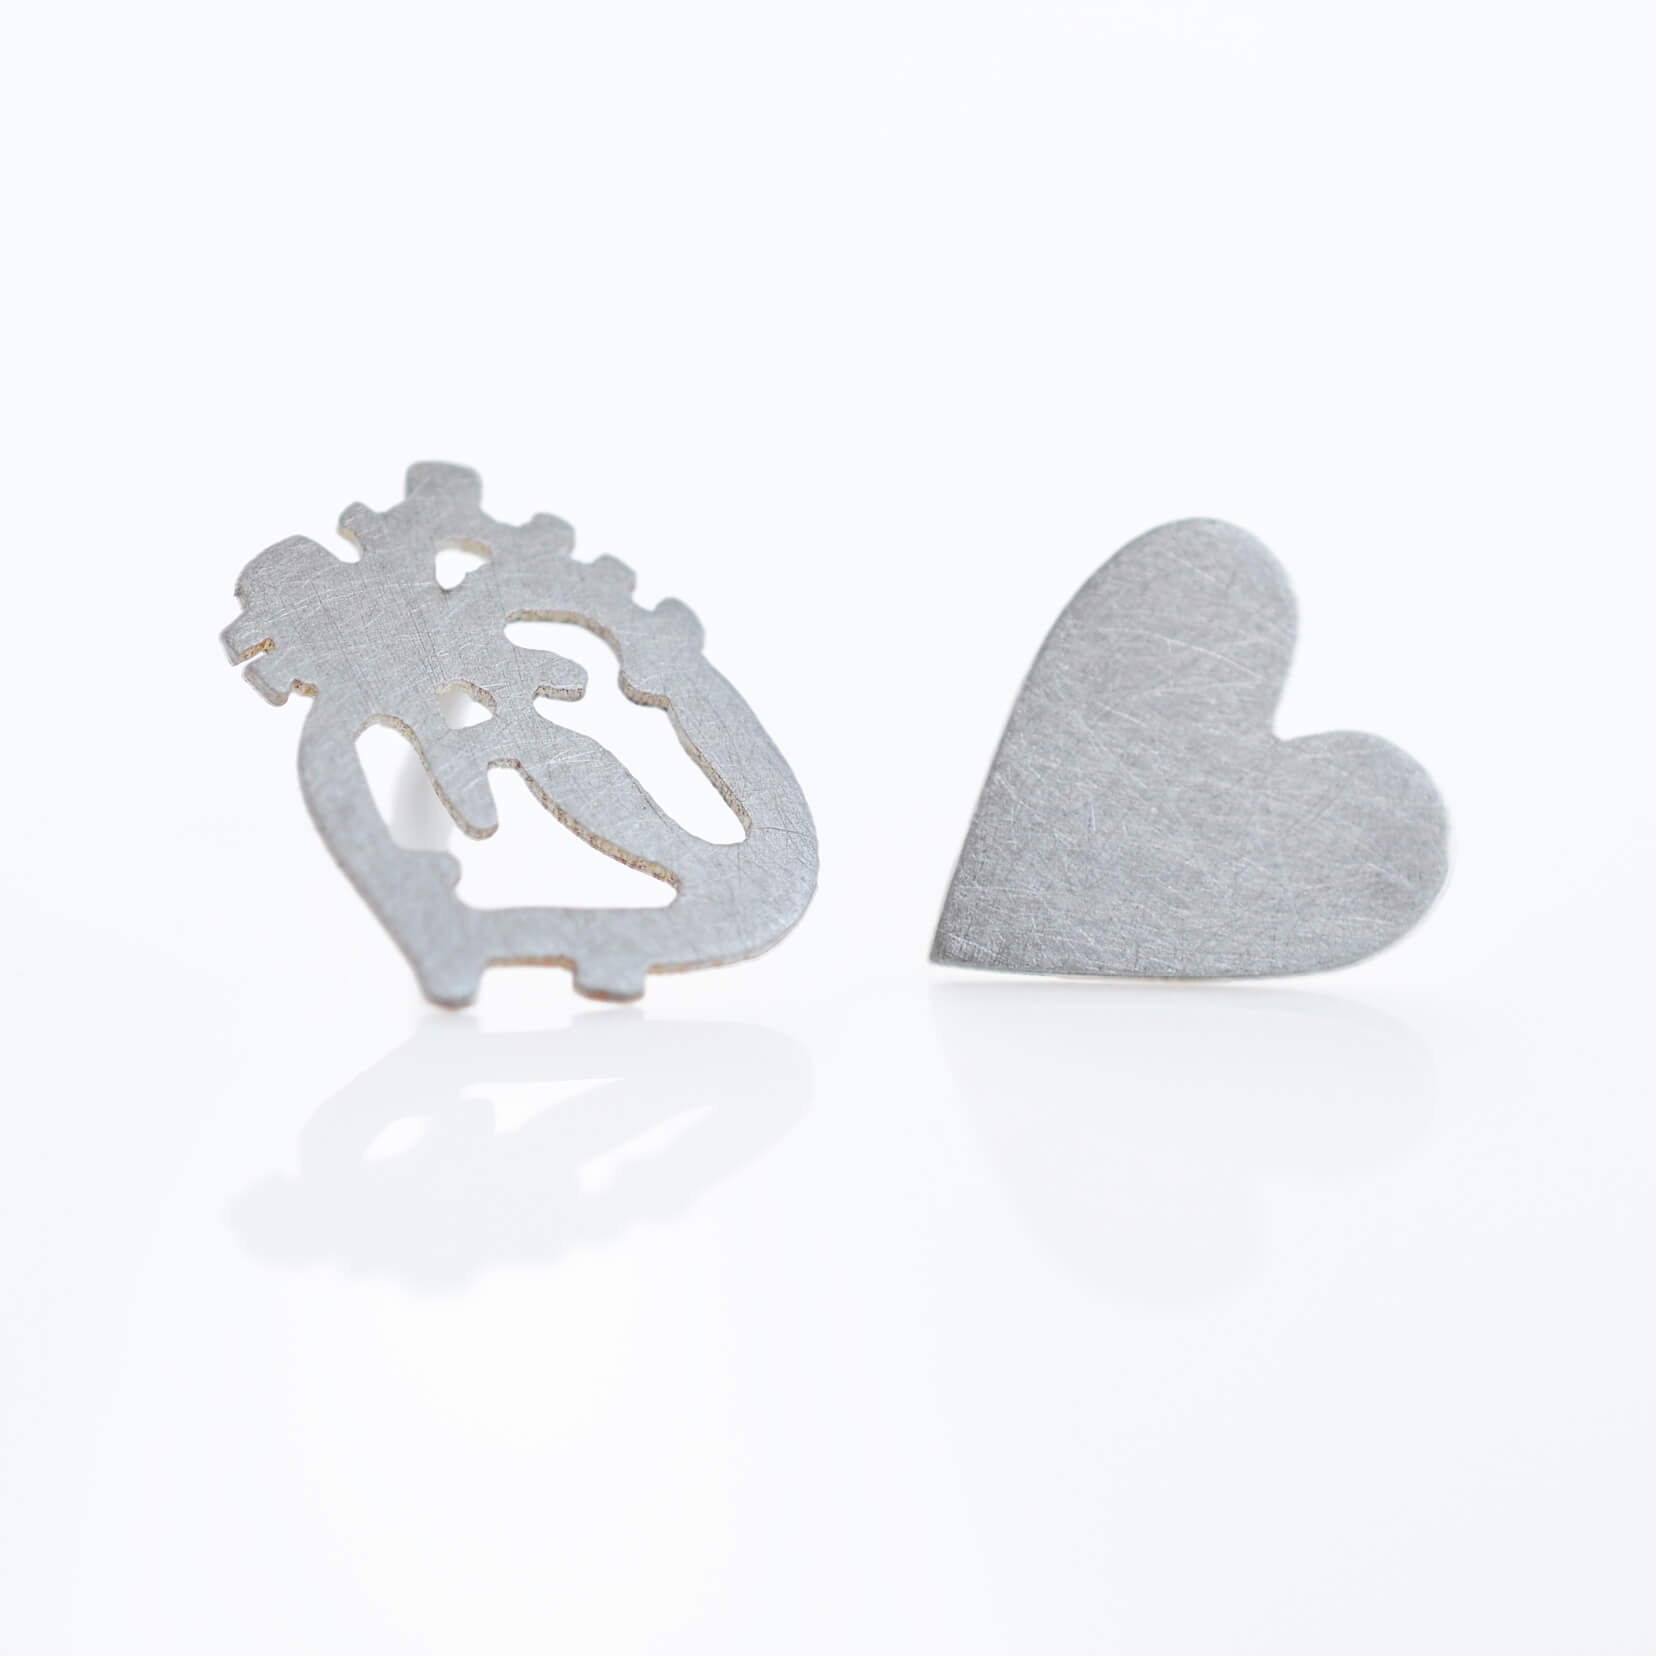 Sterling silver heart earrings. Handmade by EC Design in Minneapolis, MN with recycled metals.